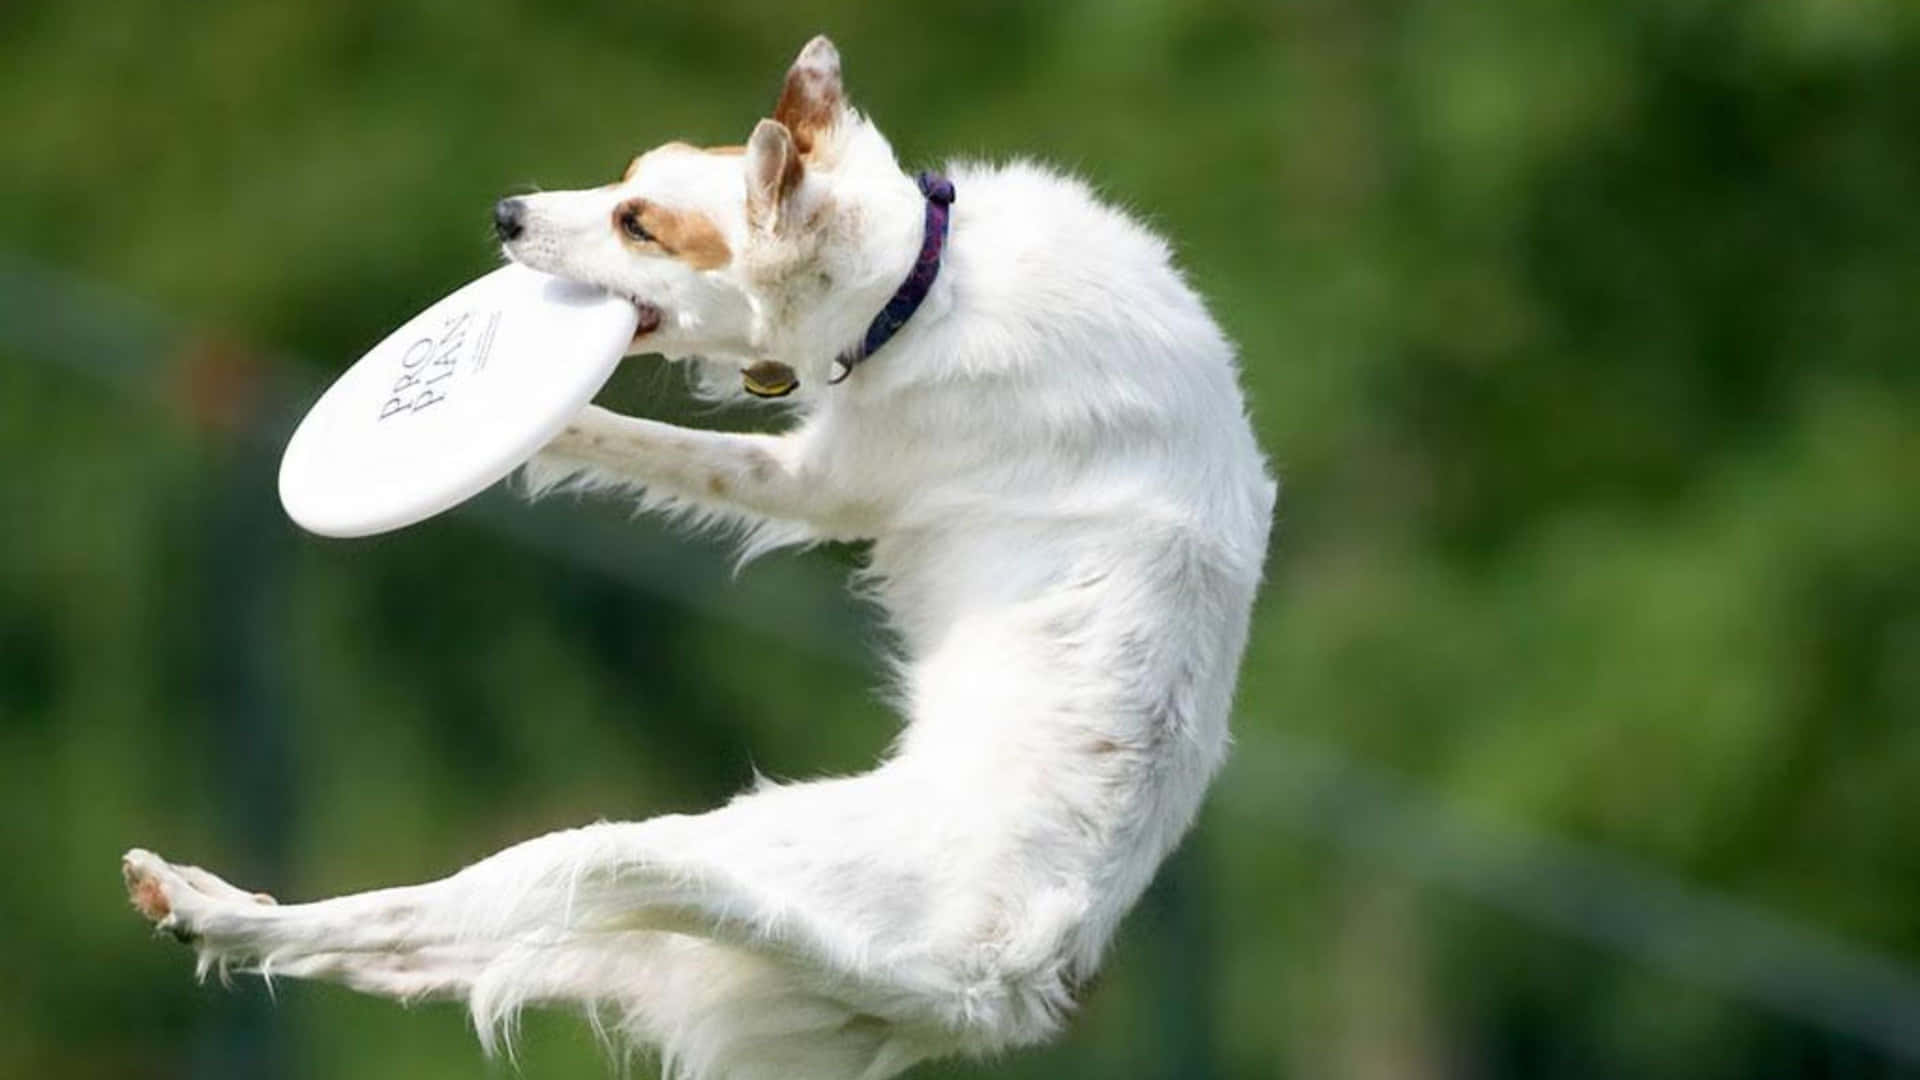 A White Dog Catching A Frisbee